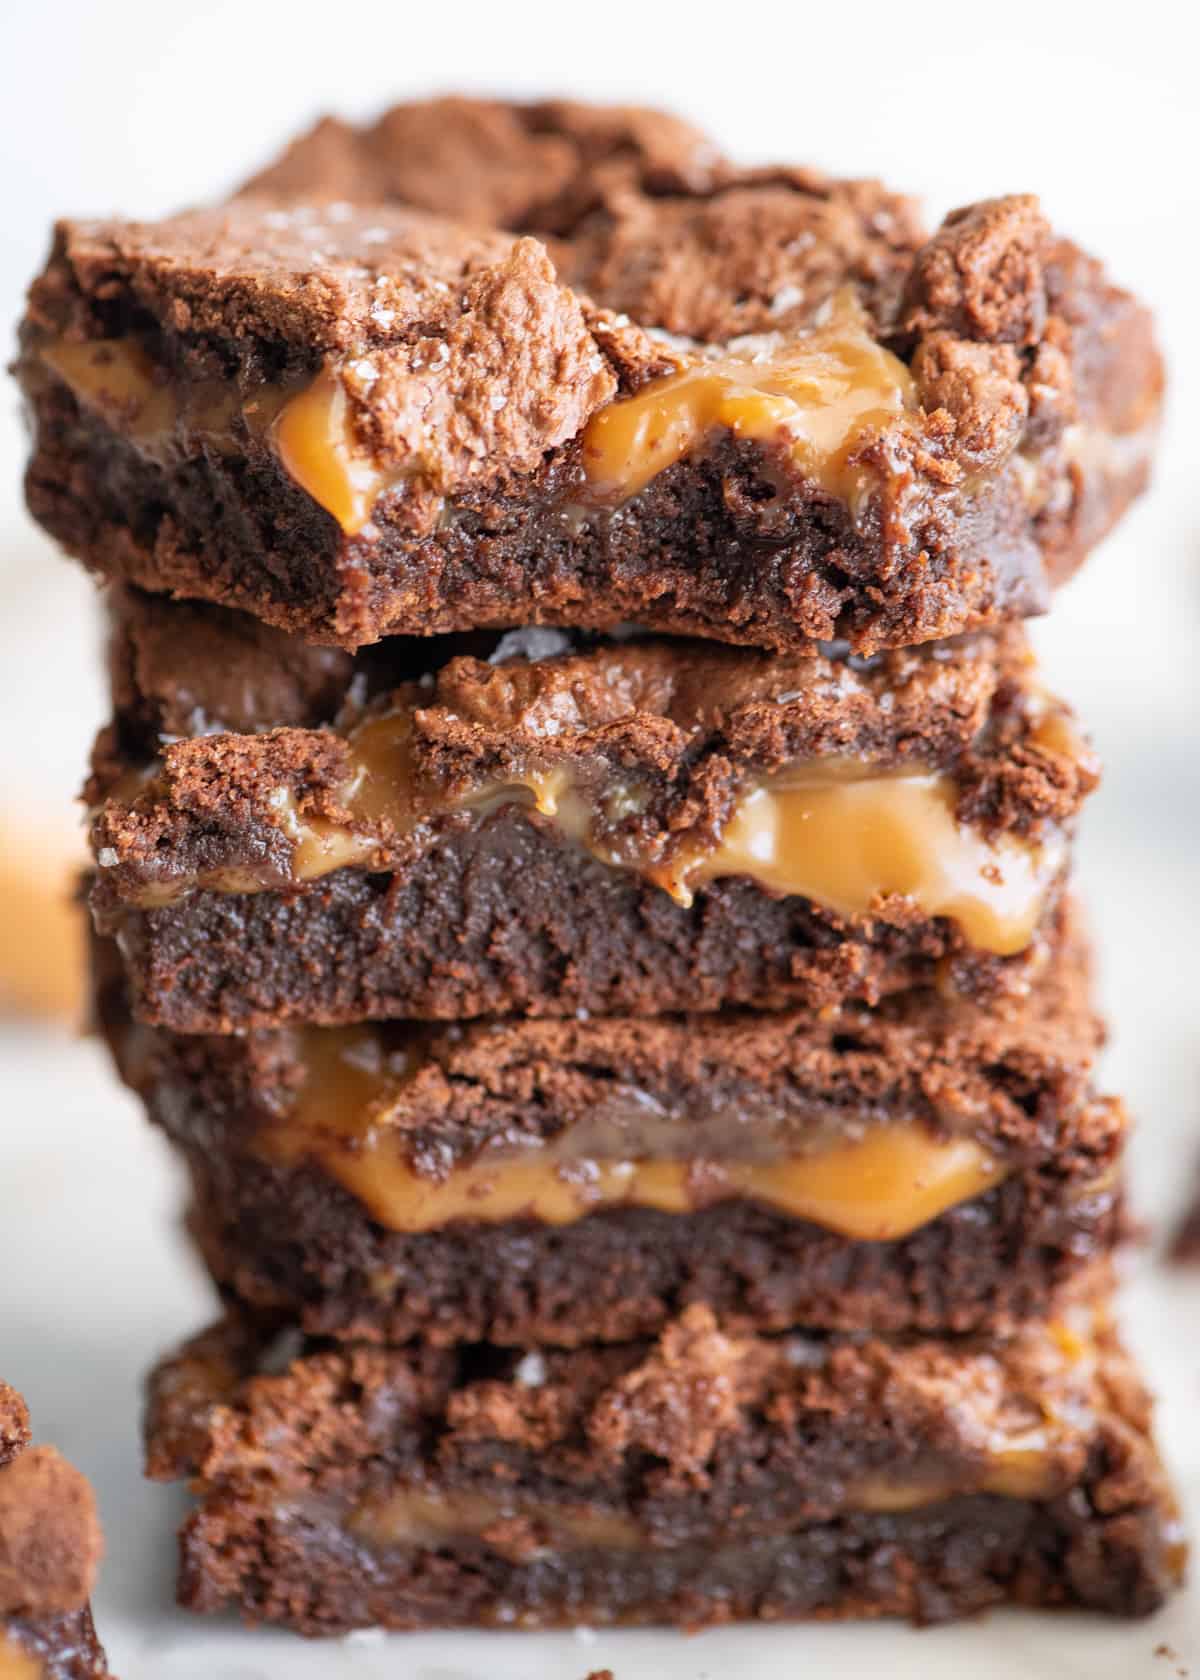 stack of 4 salted caramel brownies, the tope one has a bite taken out of it